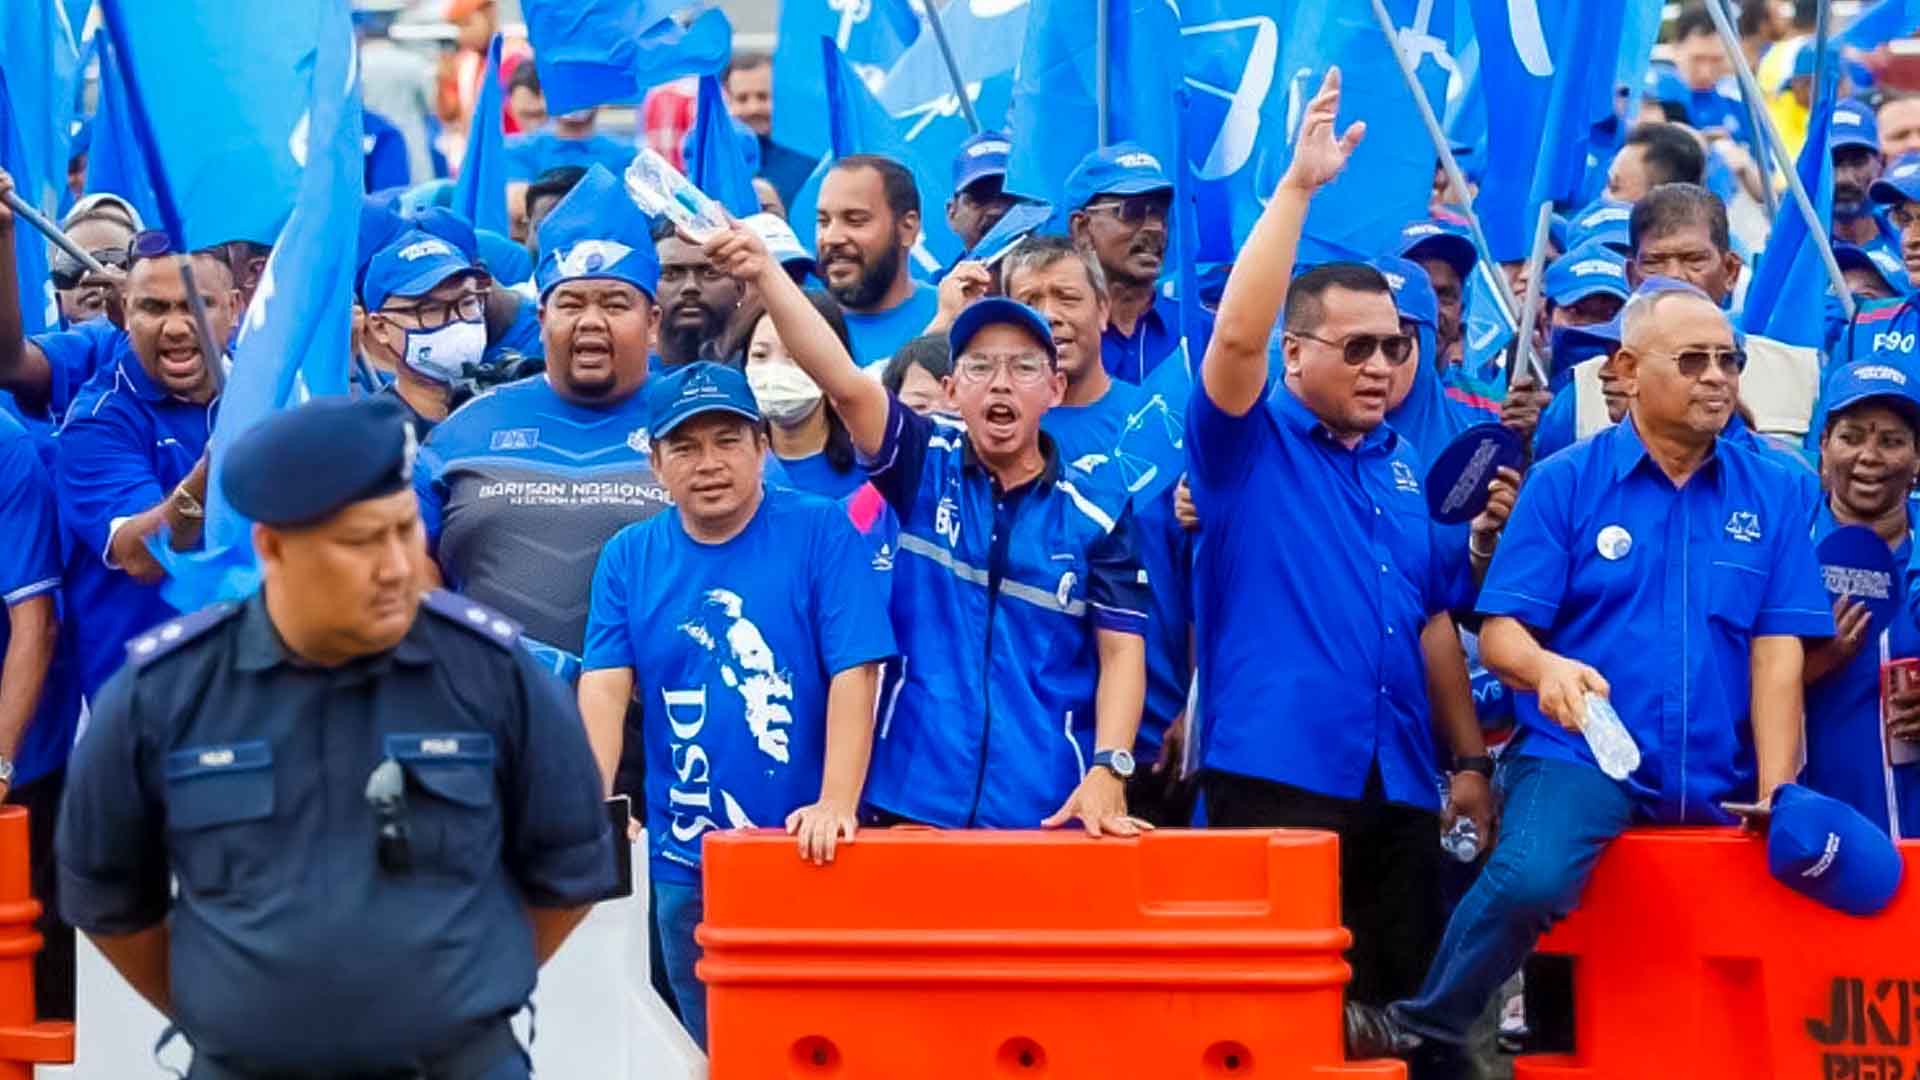 Leaders launch election campaigns in a tight race in Malaysia